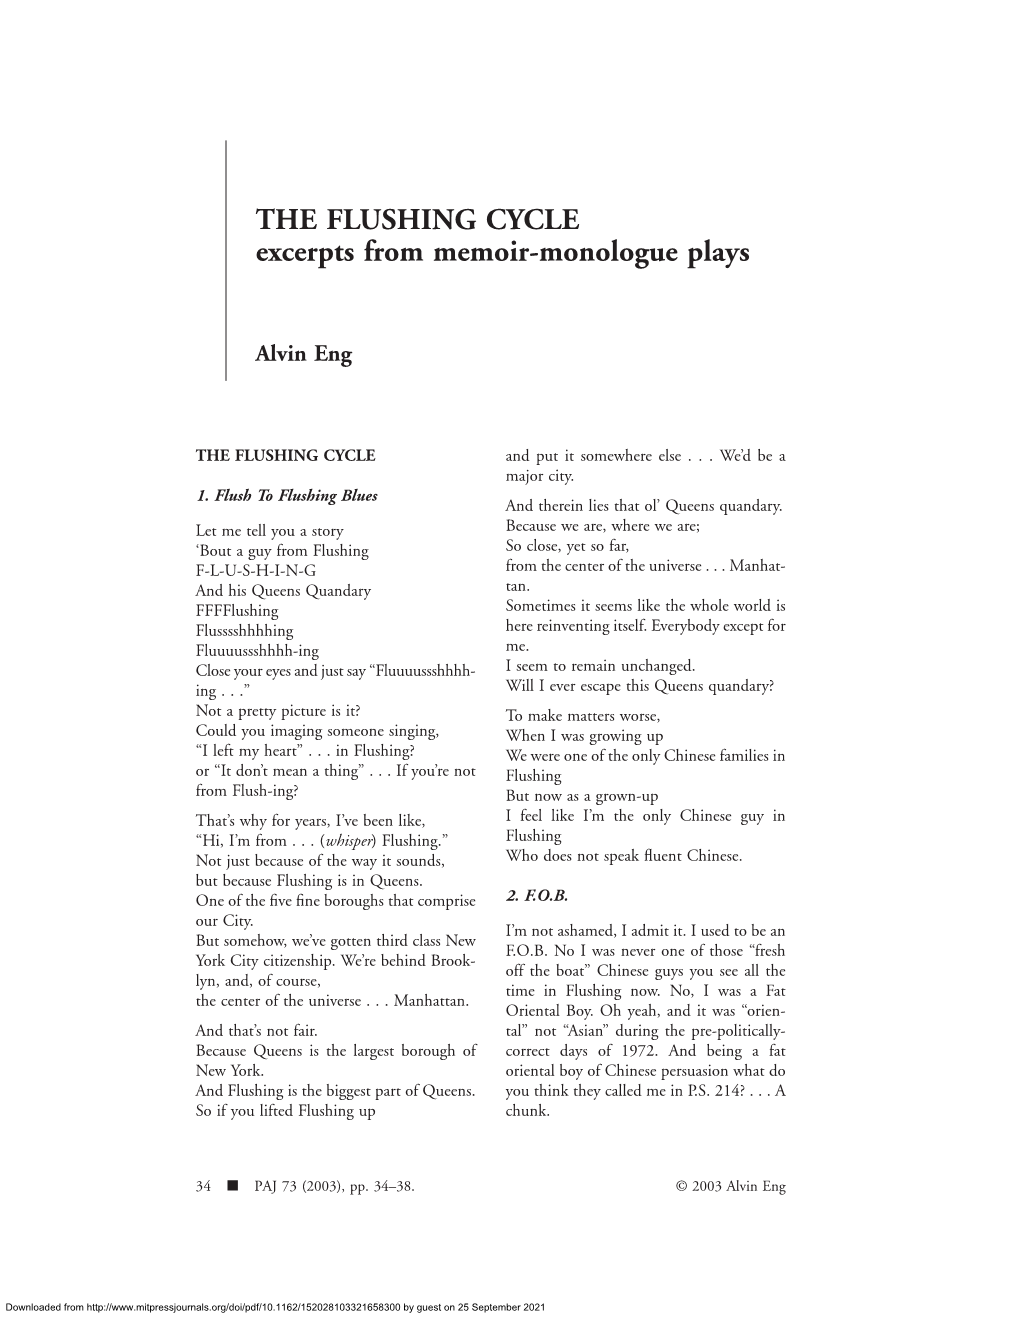 THE FLUSHING CYCLE Excerpts from Memoir-Monologue Plays